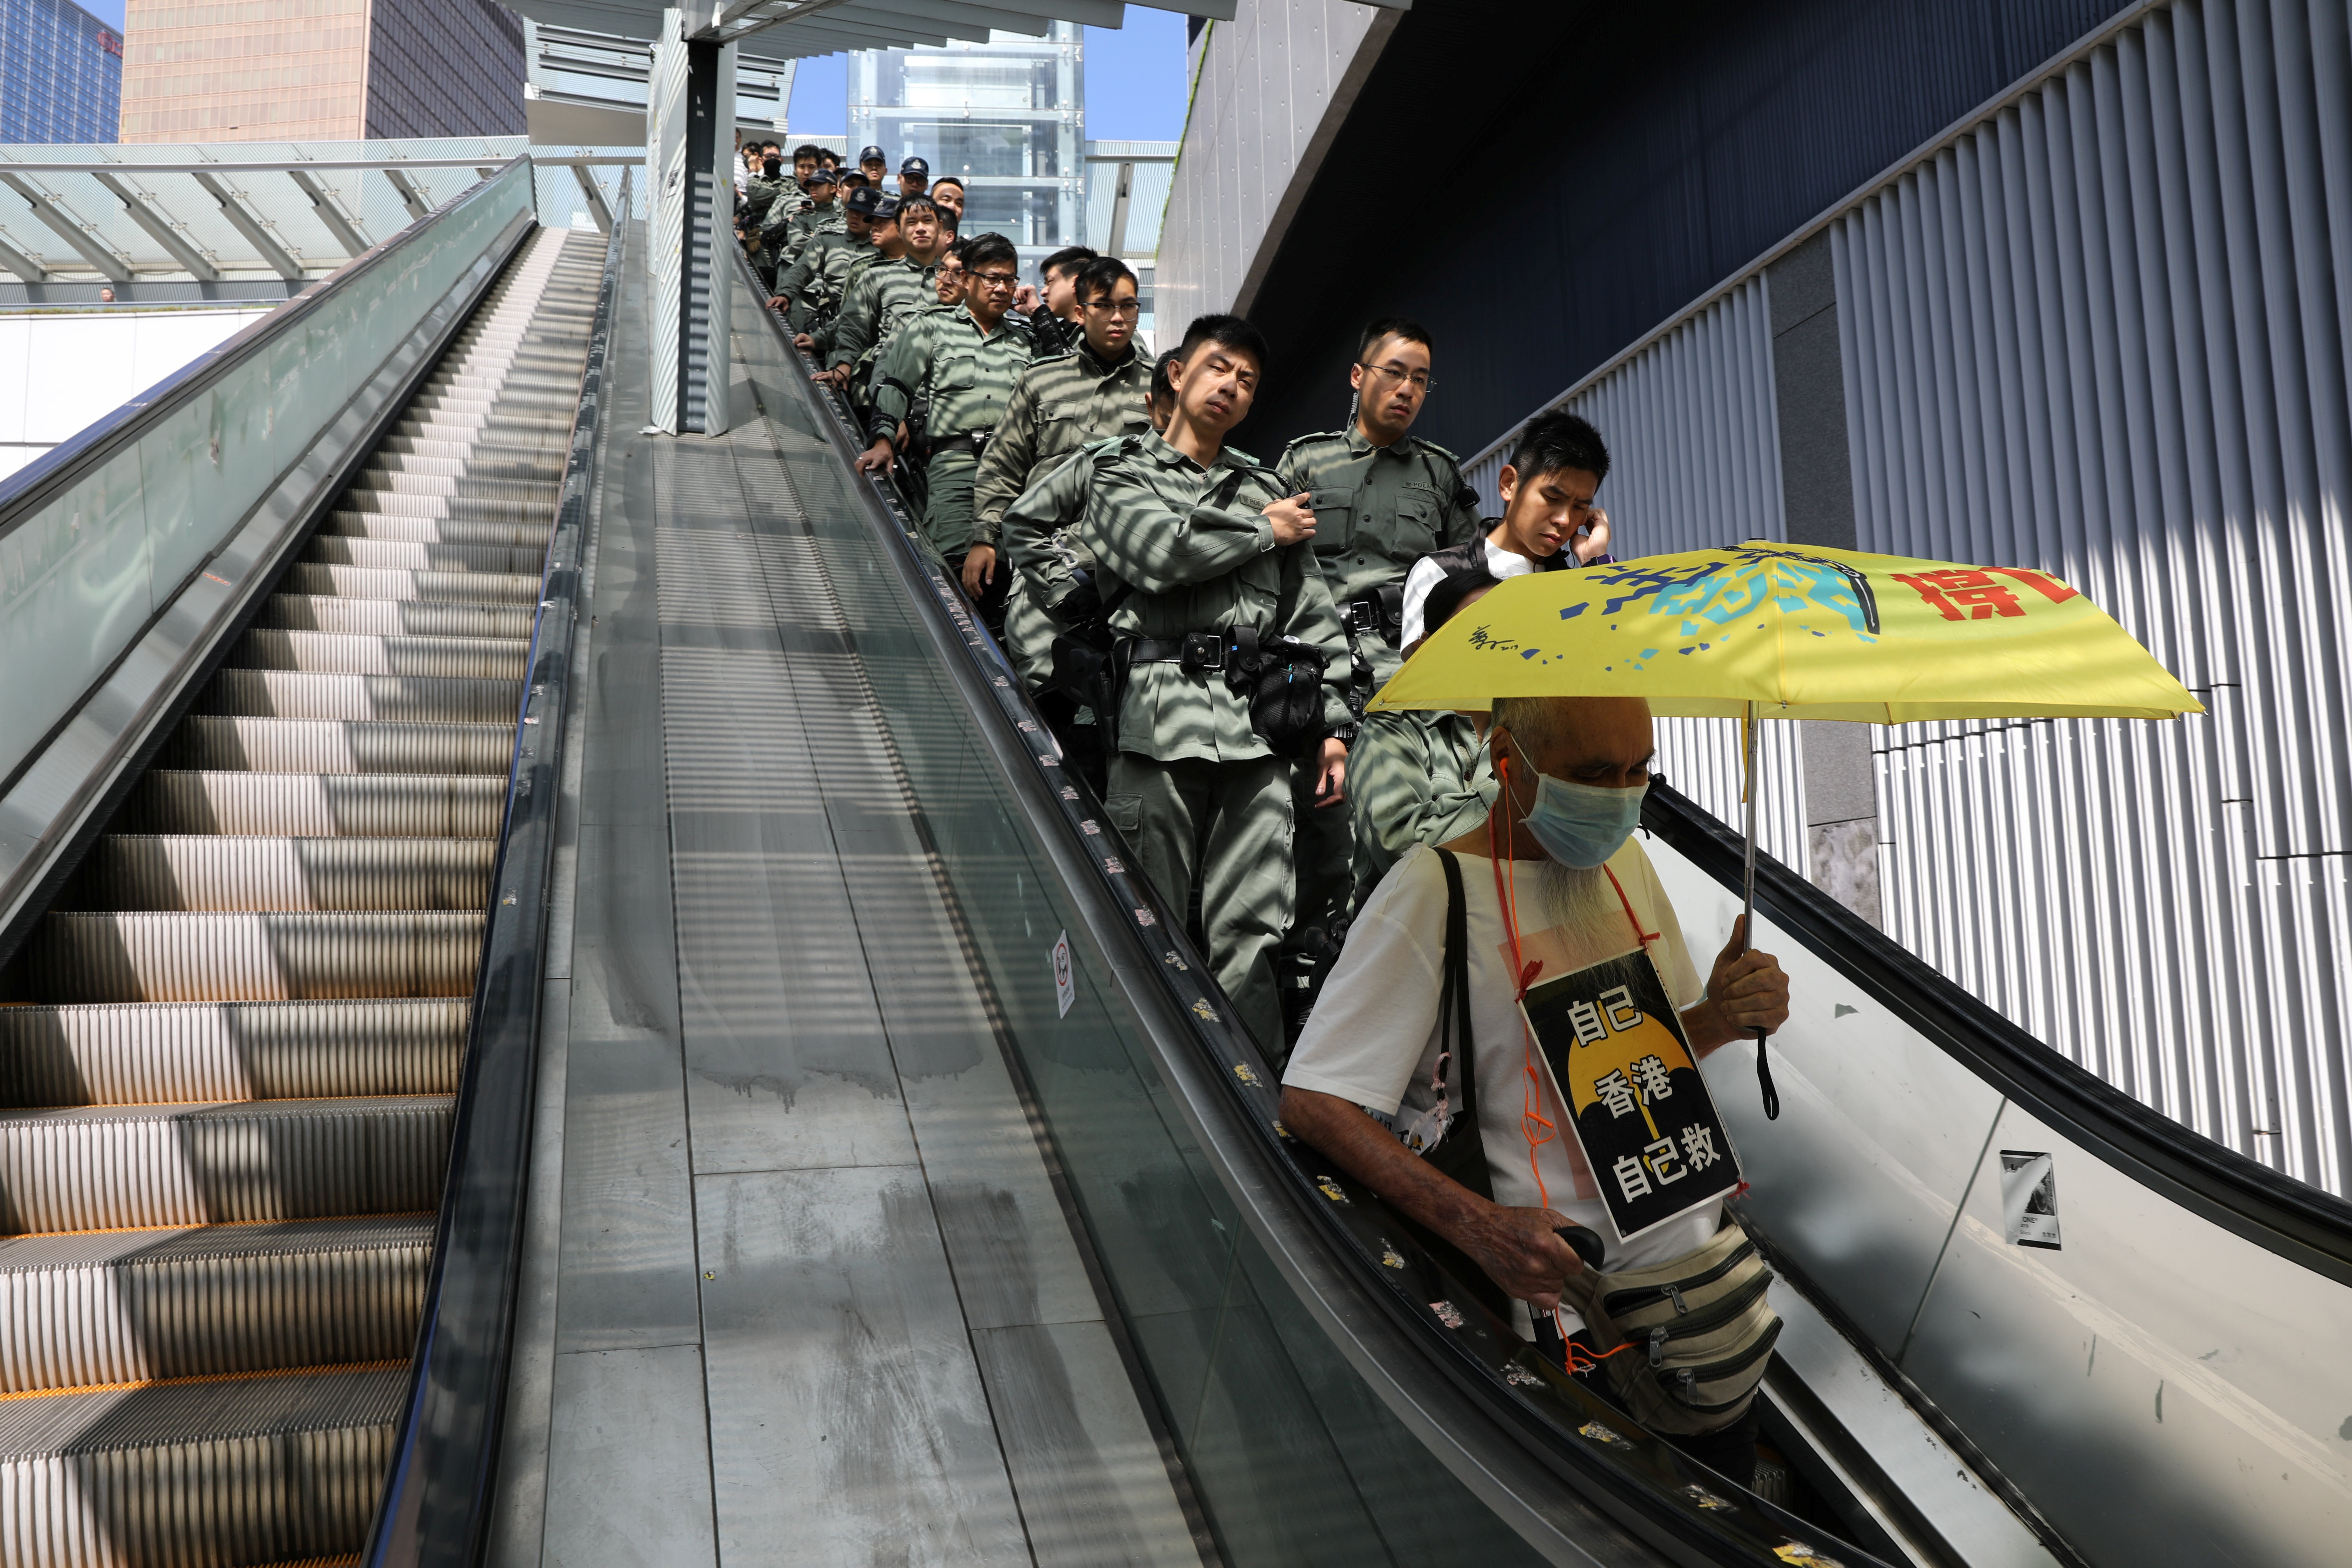 A line of police officers ride an escalator at the Legislative Council on October 16, behind a protester holding an umbrella. Photo: Reuters